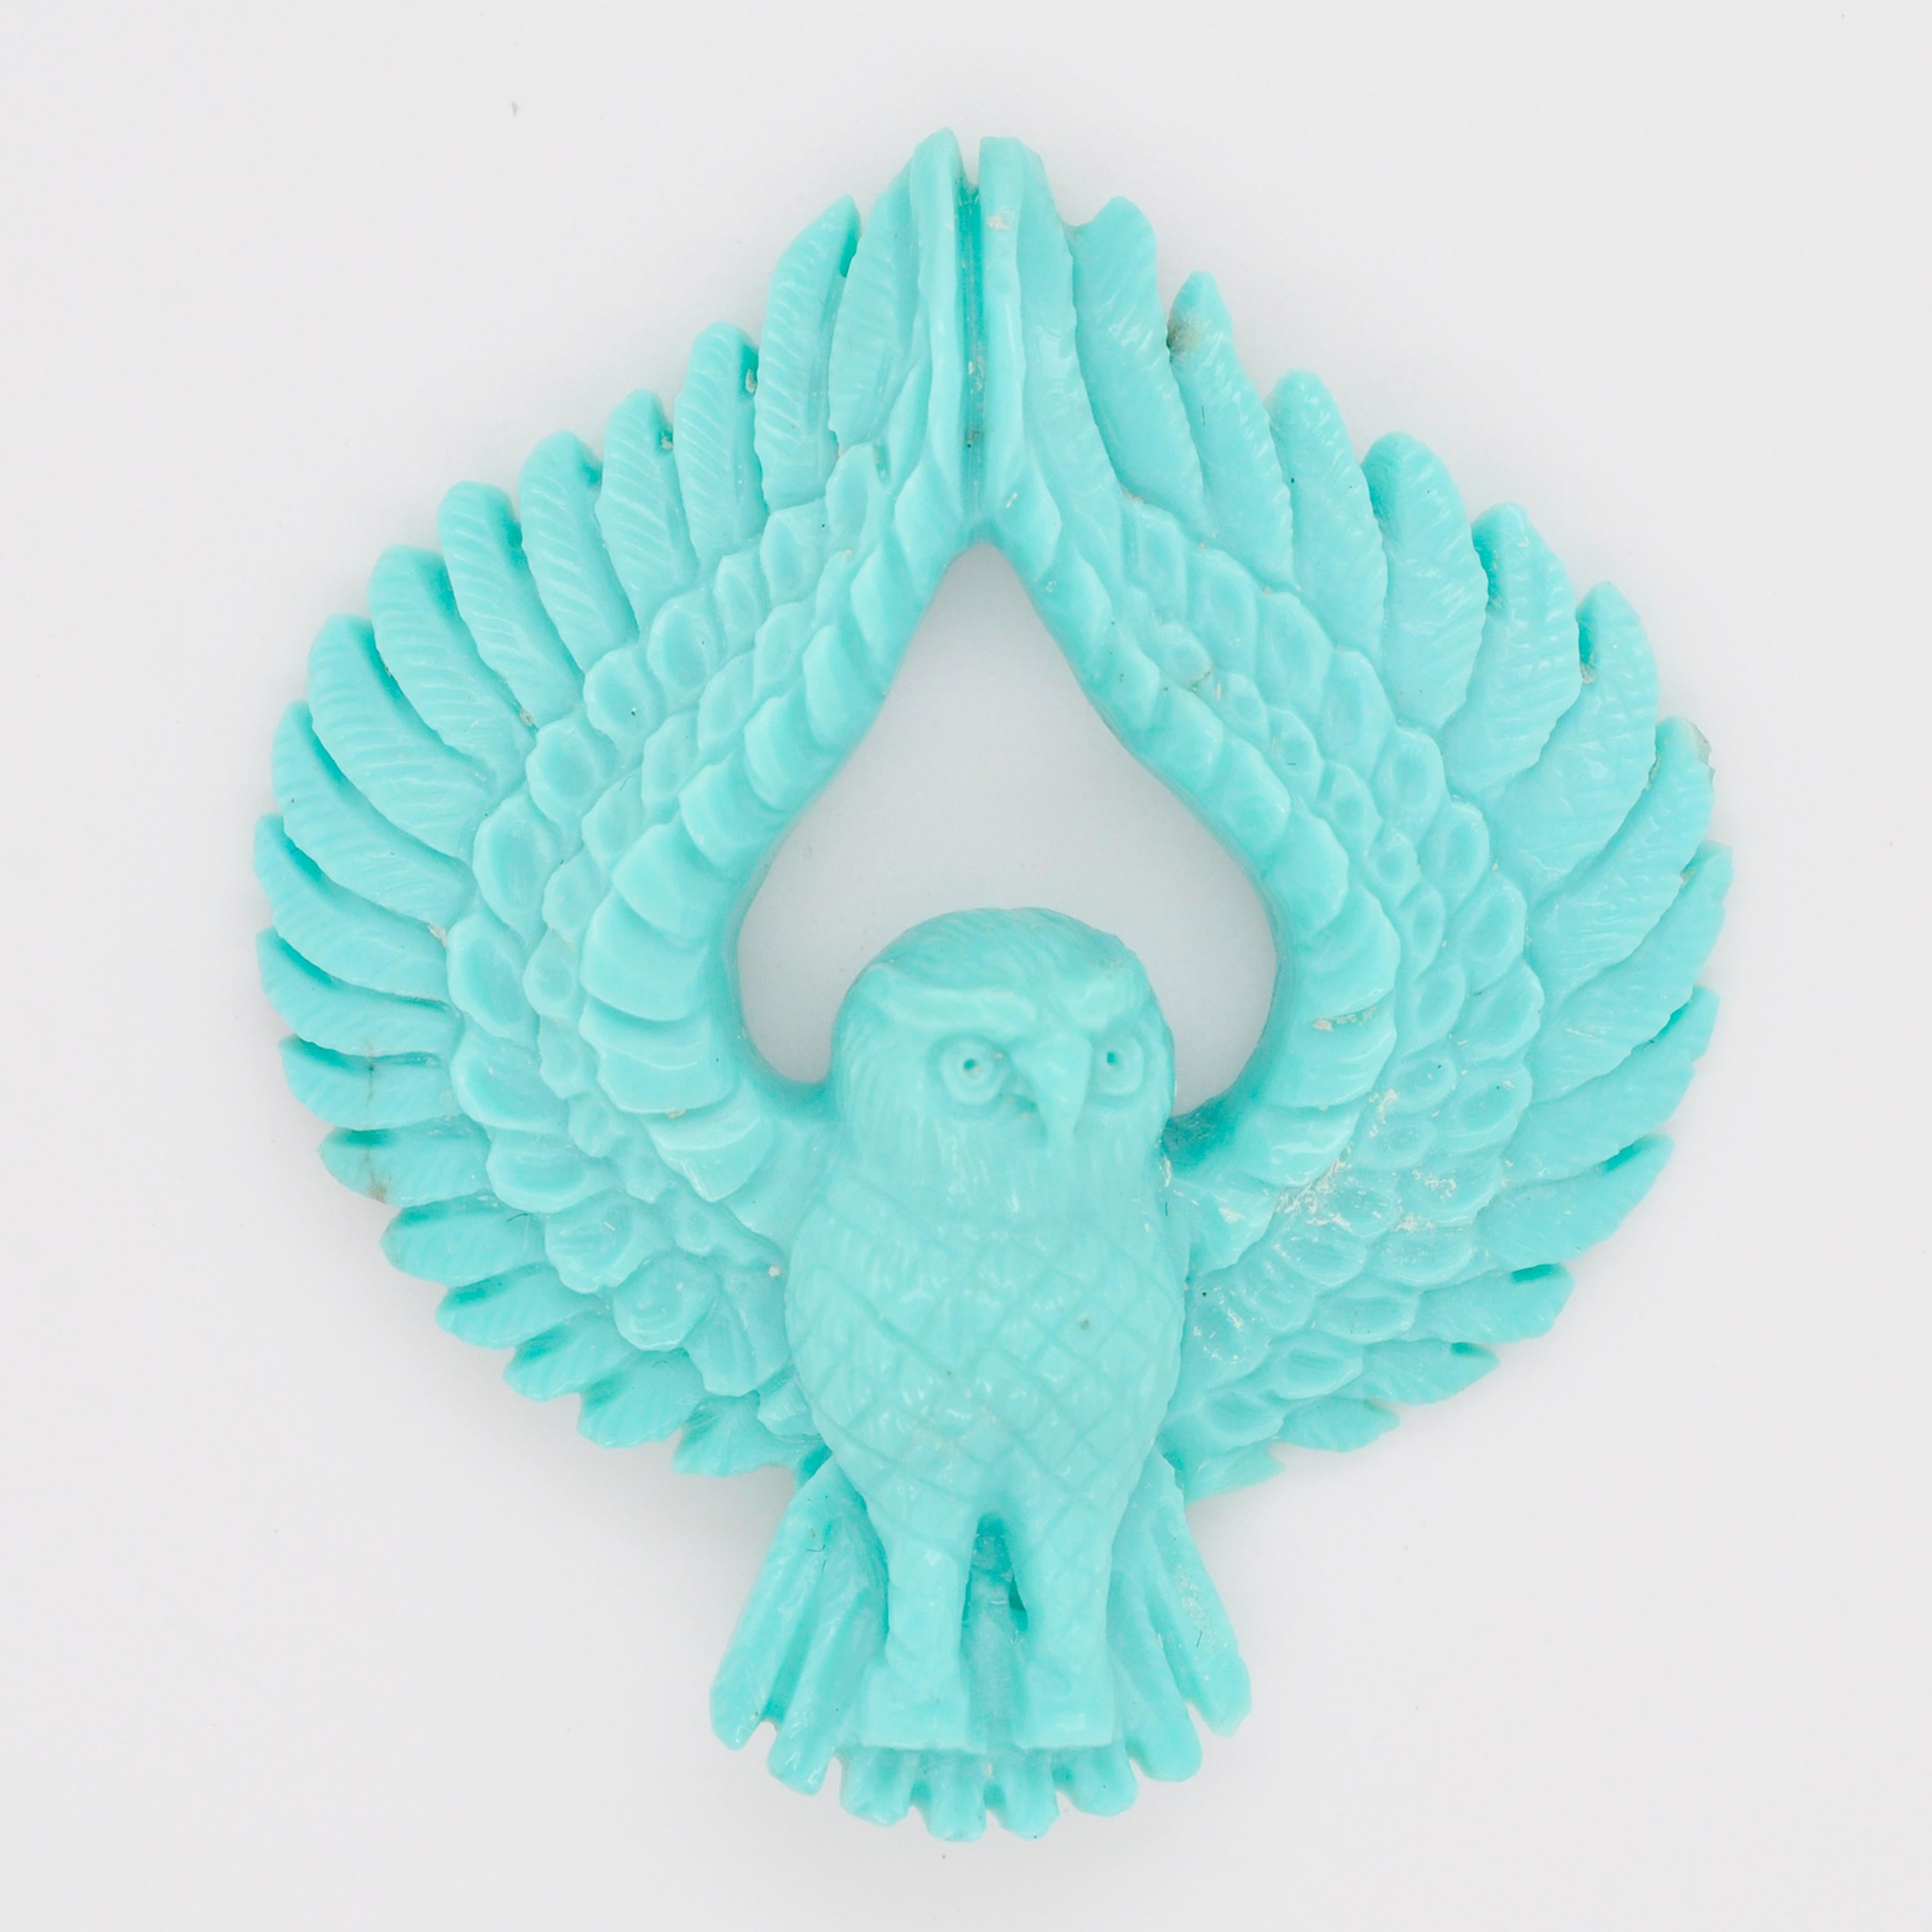 Contemporary 27.46 Carat Natural Arizona Turquoise Owl Carving Loose Gemstone For Sale